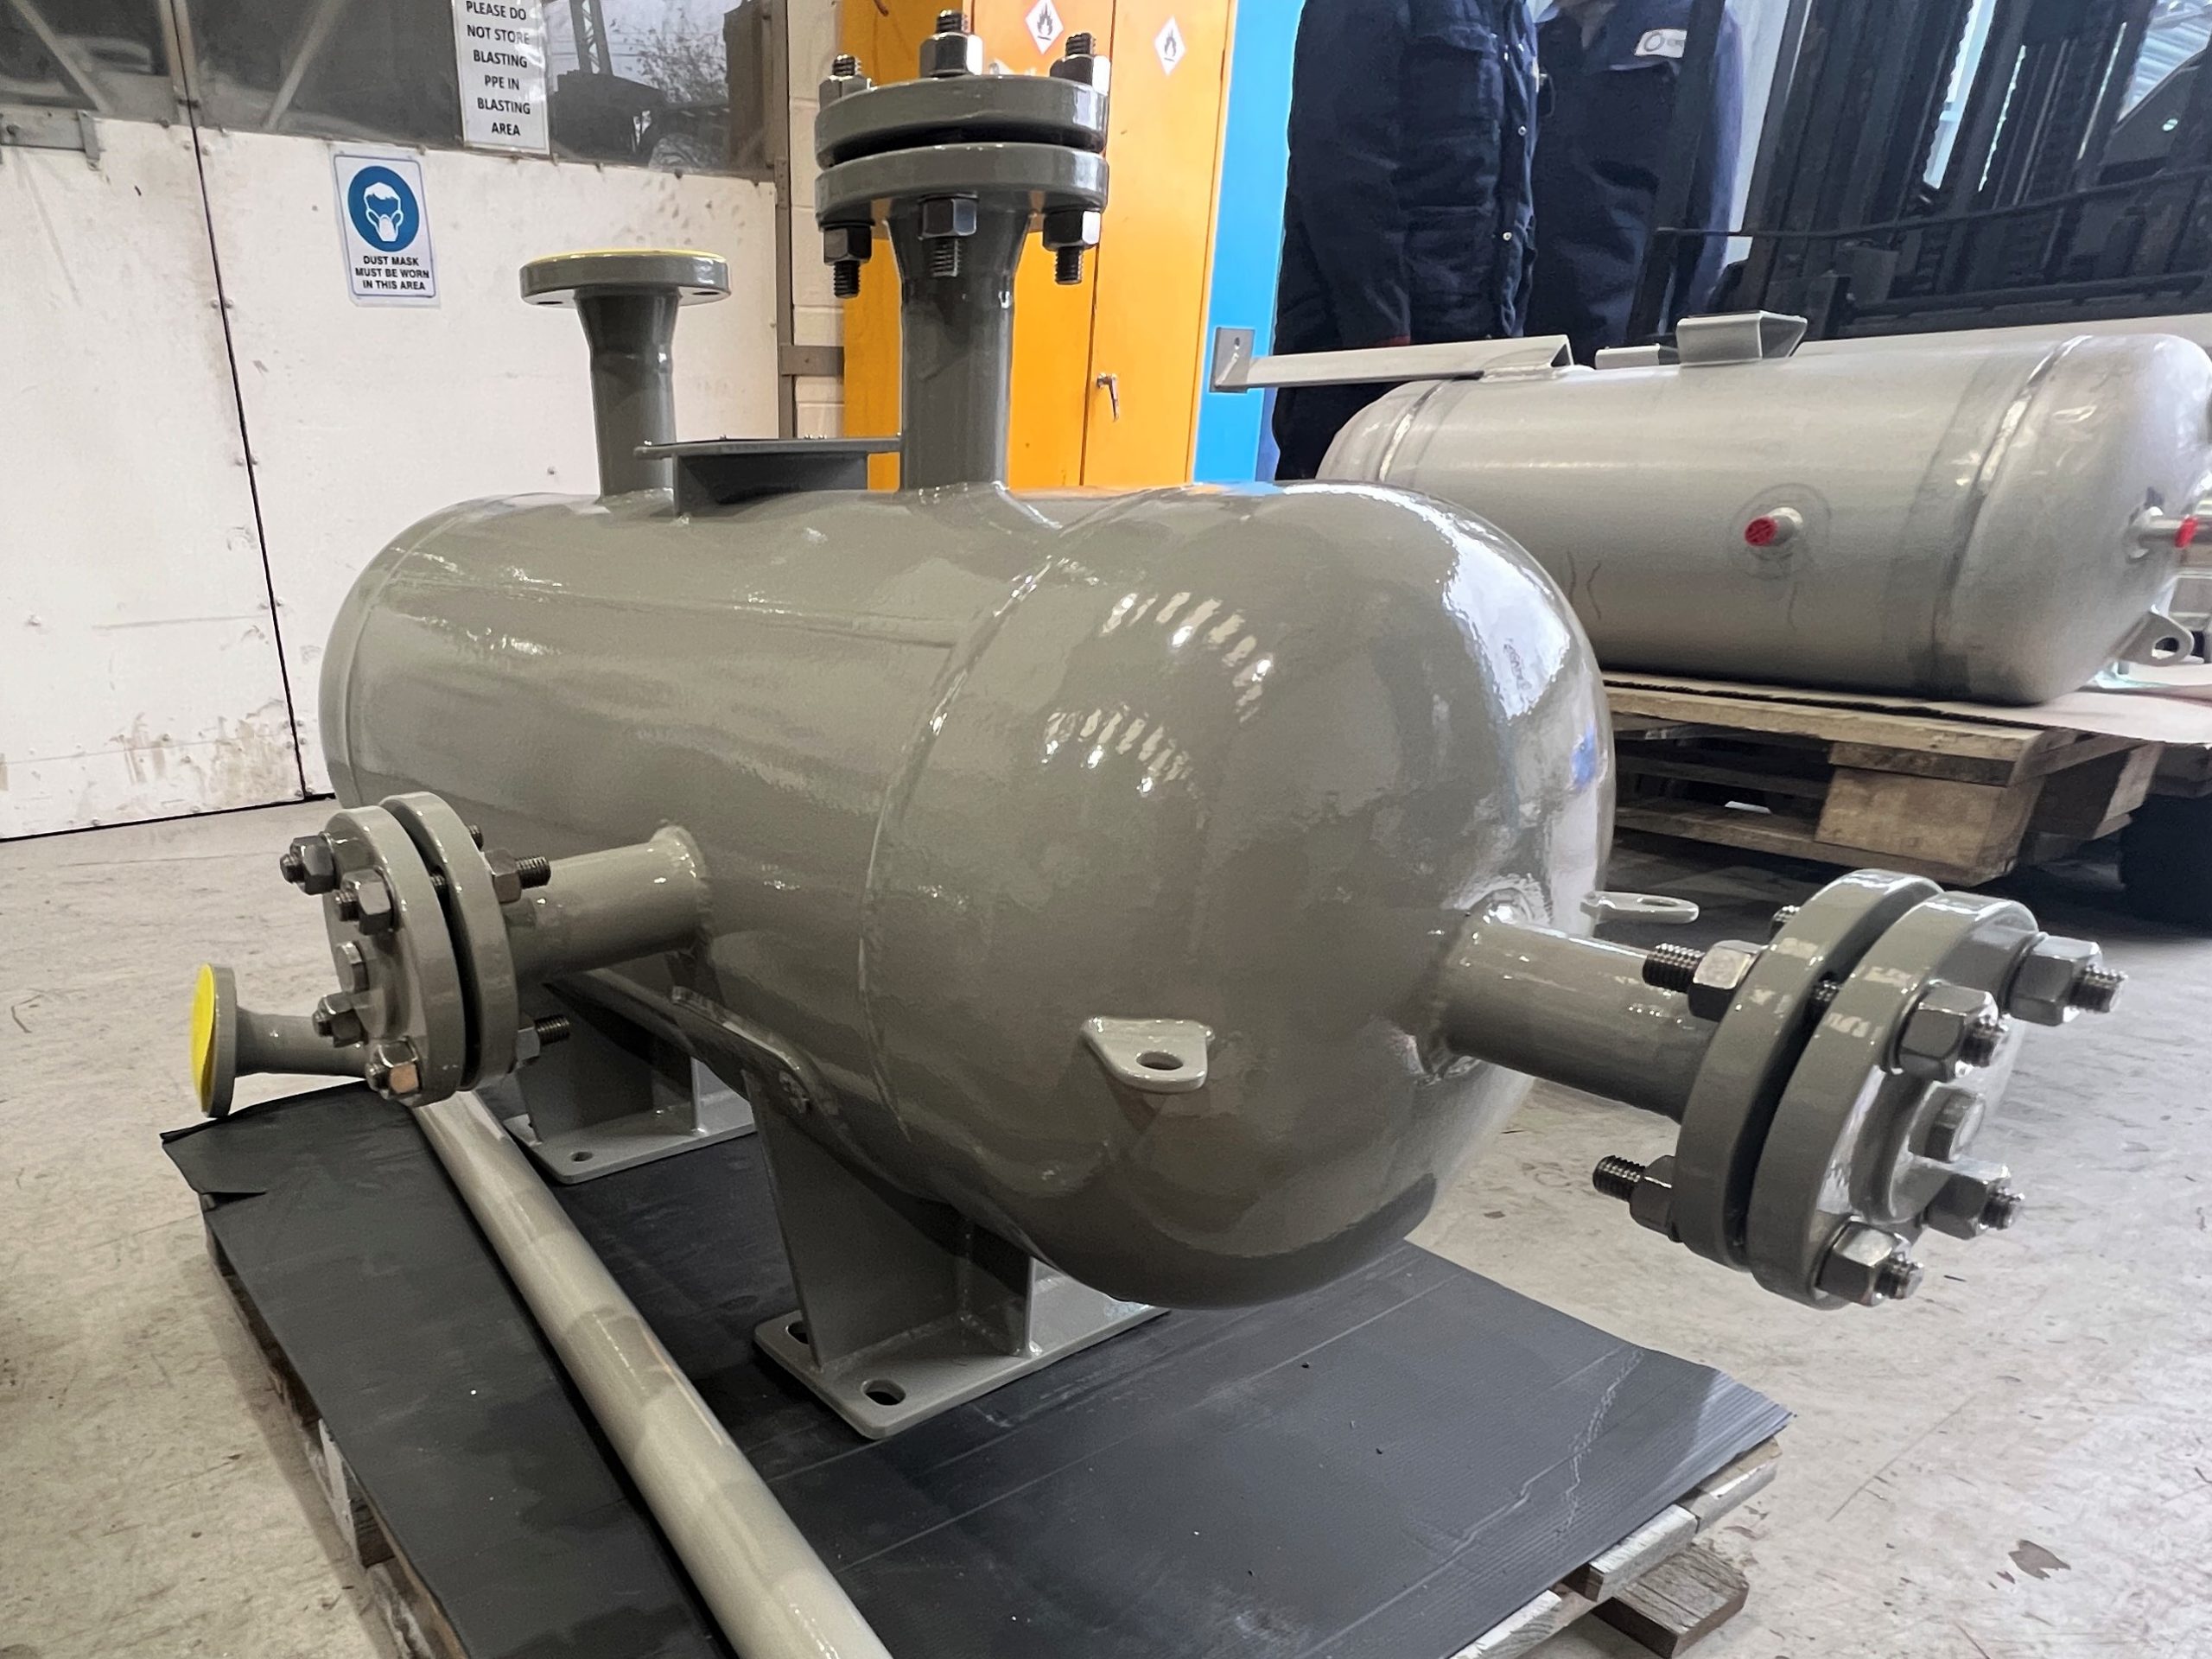 ASME U Air Receiver made by CPE Pressure Vessels for the Gallaf 3 project